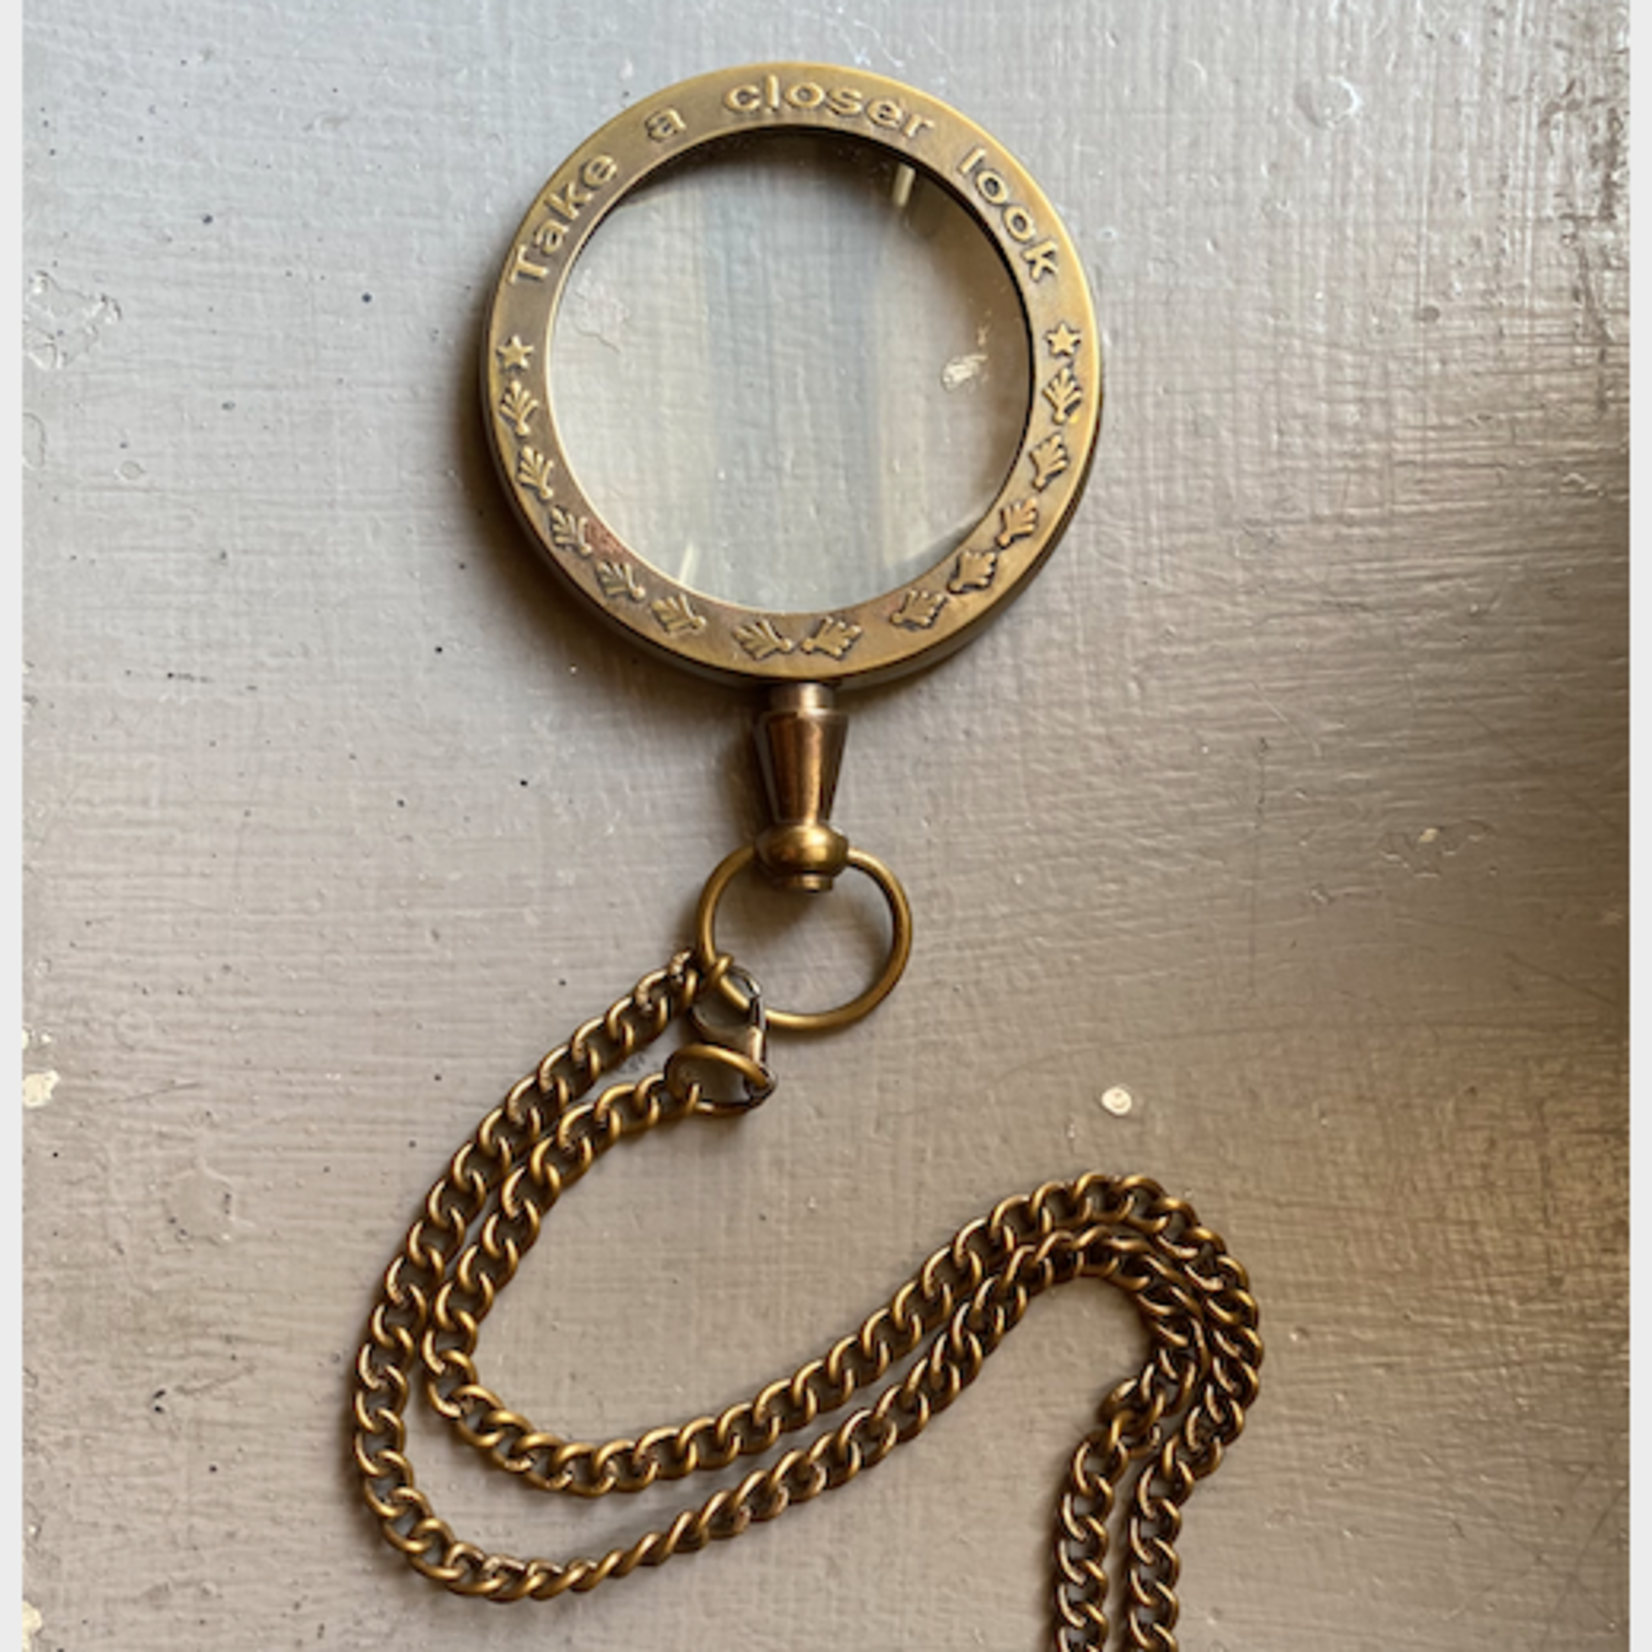 CHEHOMA MAGNIFIER WITH CHAIN 'TAKE A CLOSER LOOK'